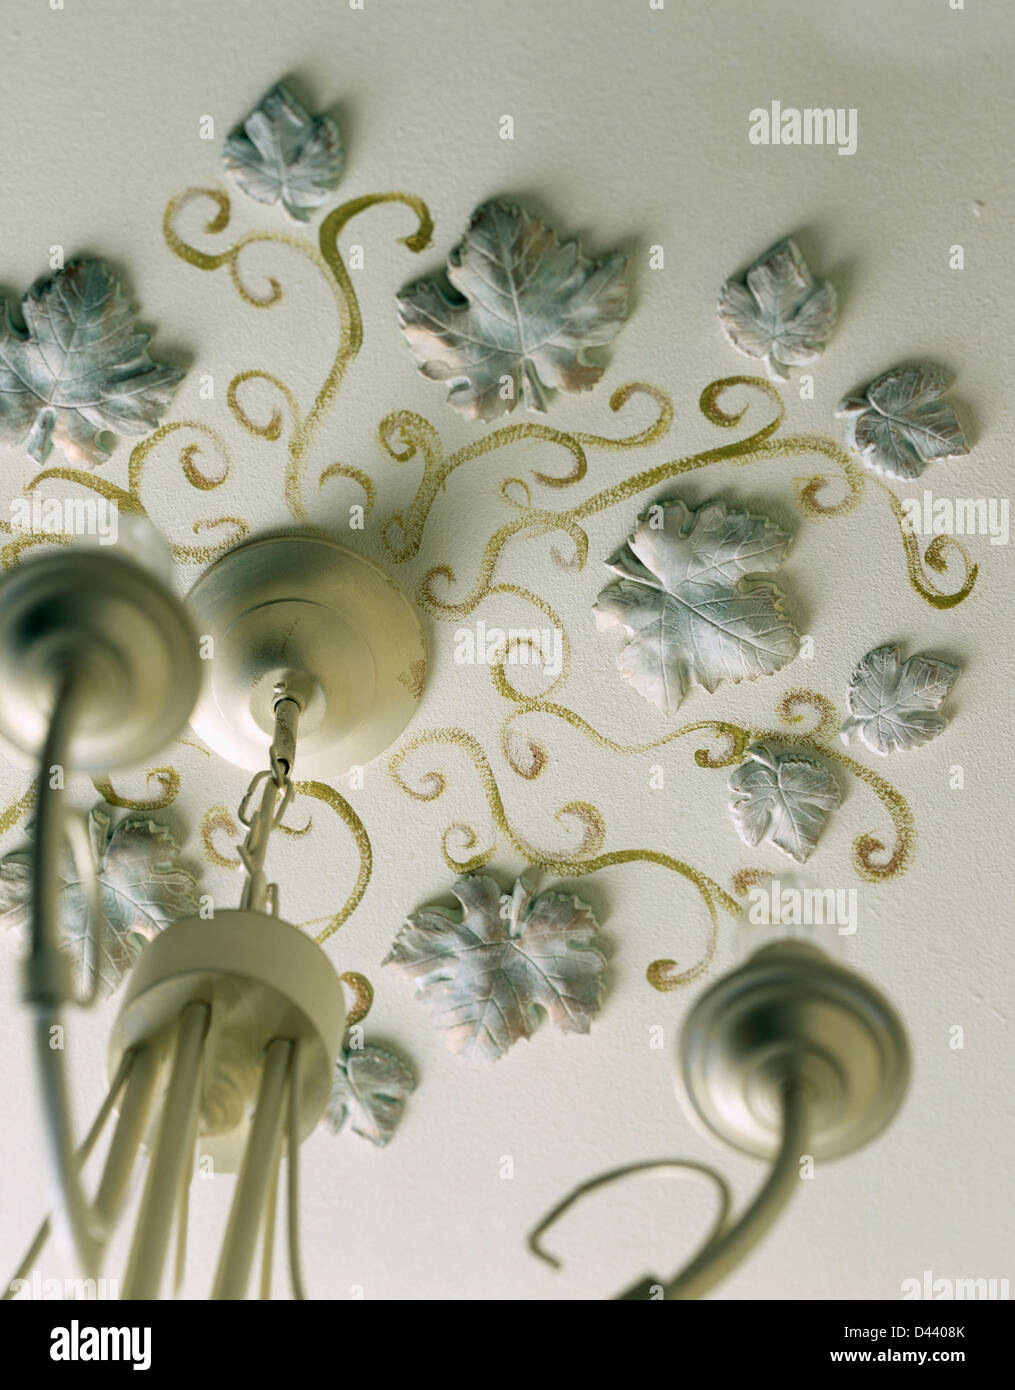 Hand-painted plaster ivy leaves and gold decoration on ceiling around light fitting Stock Photo